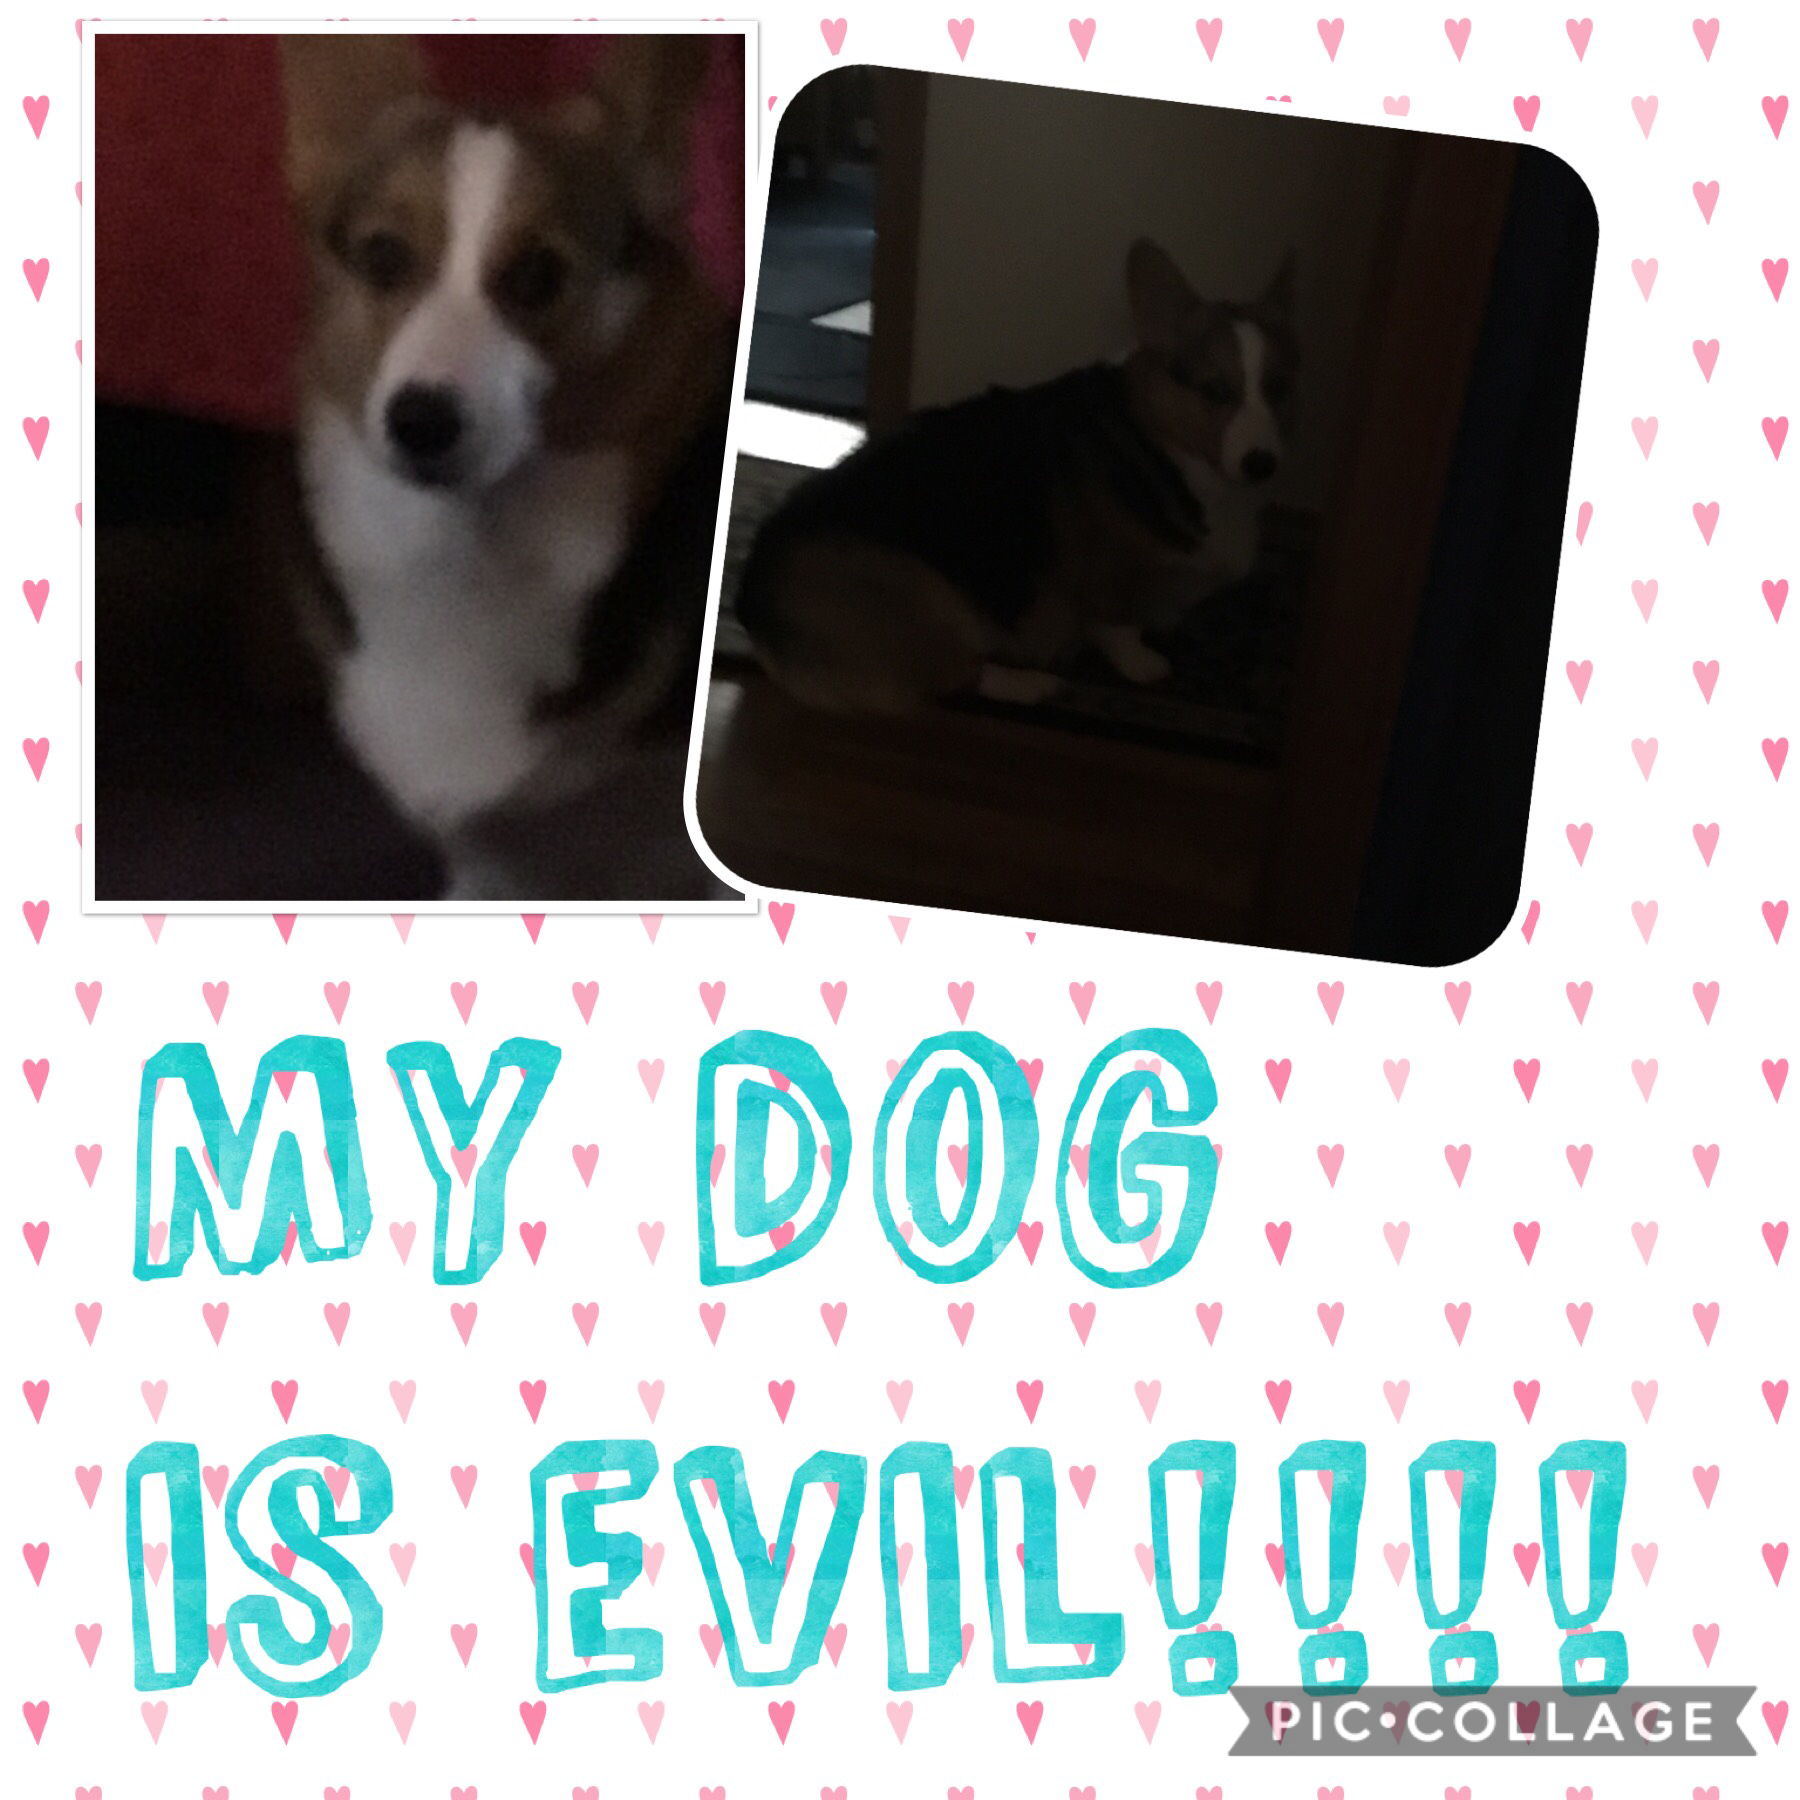 Silver: MY DOG IS EVIL!!!